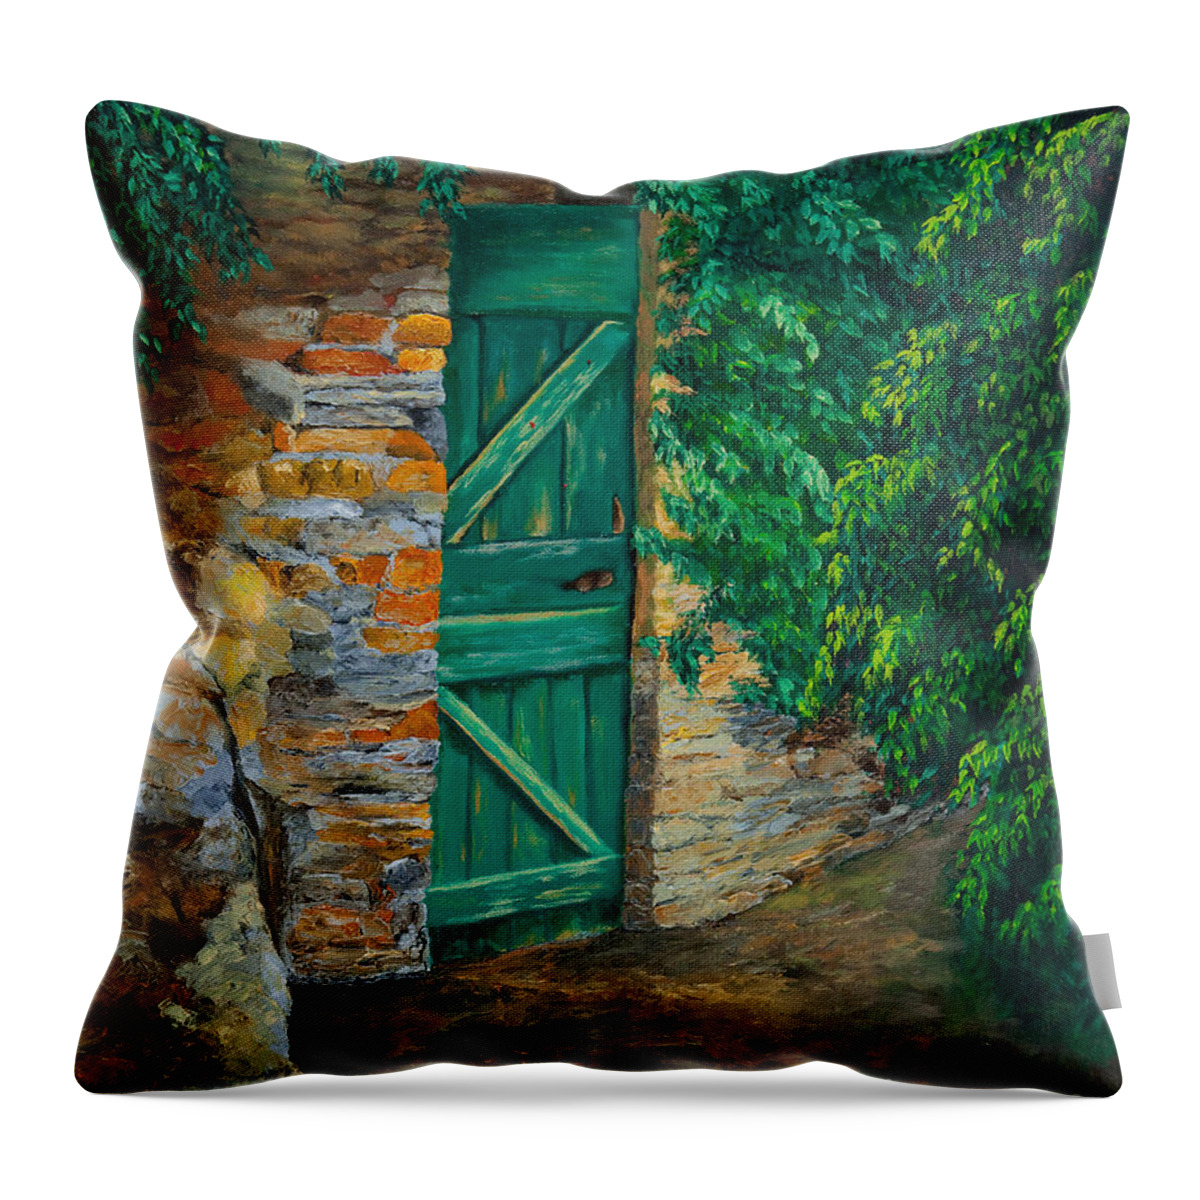 Cinque Terre Italy Art Throw Pillow featuring the painting The Garden Gate In Cinque Terre by Charlotte Blanchard